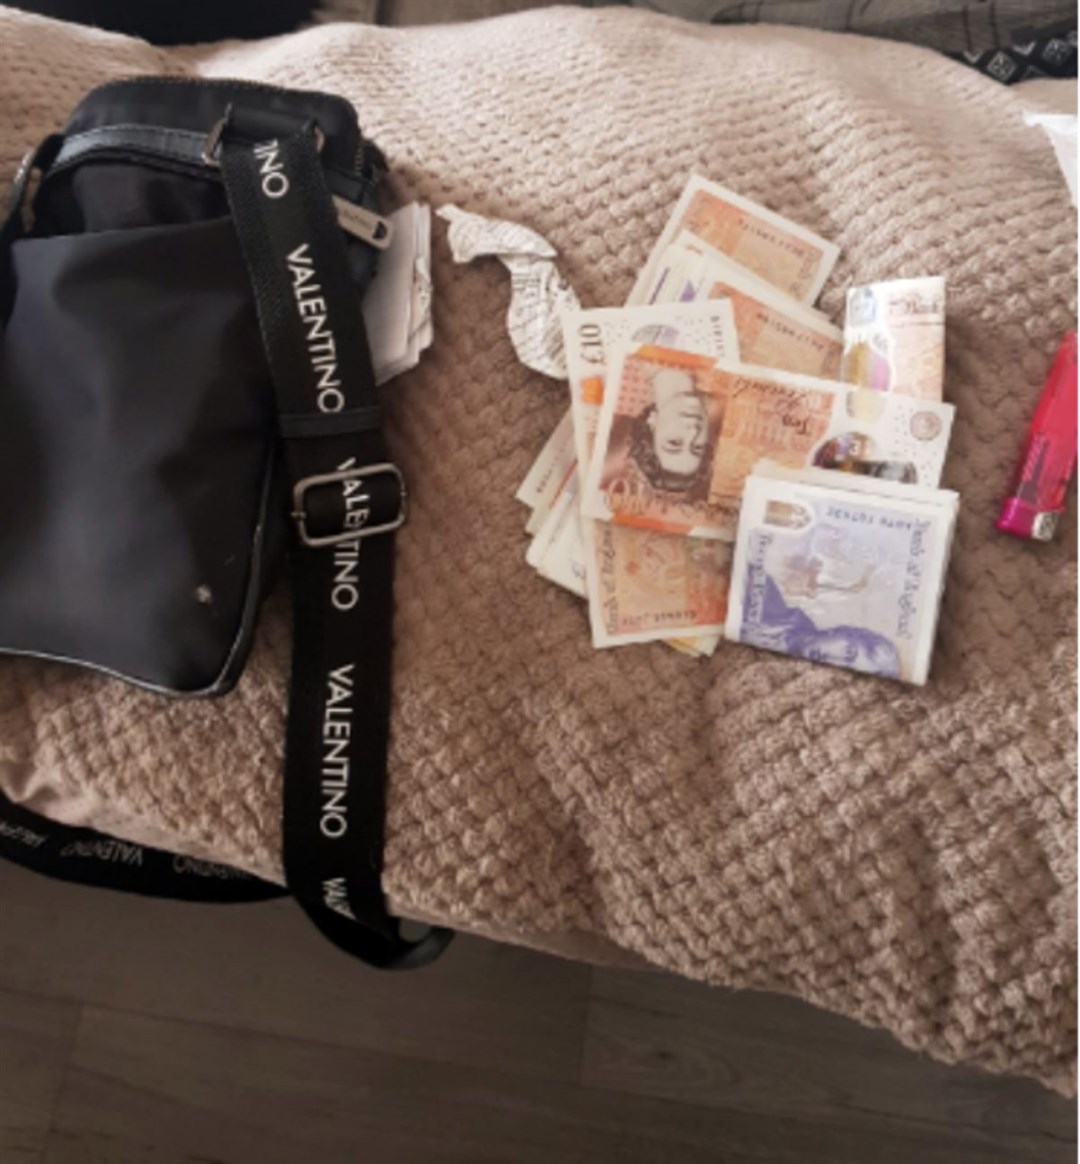 More than £10,000 in cash was seized from Hennigan’s home, found hidden in a bag and pillowcase (Home Office/PA)